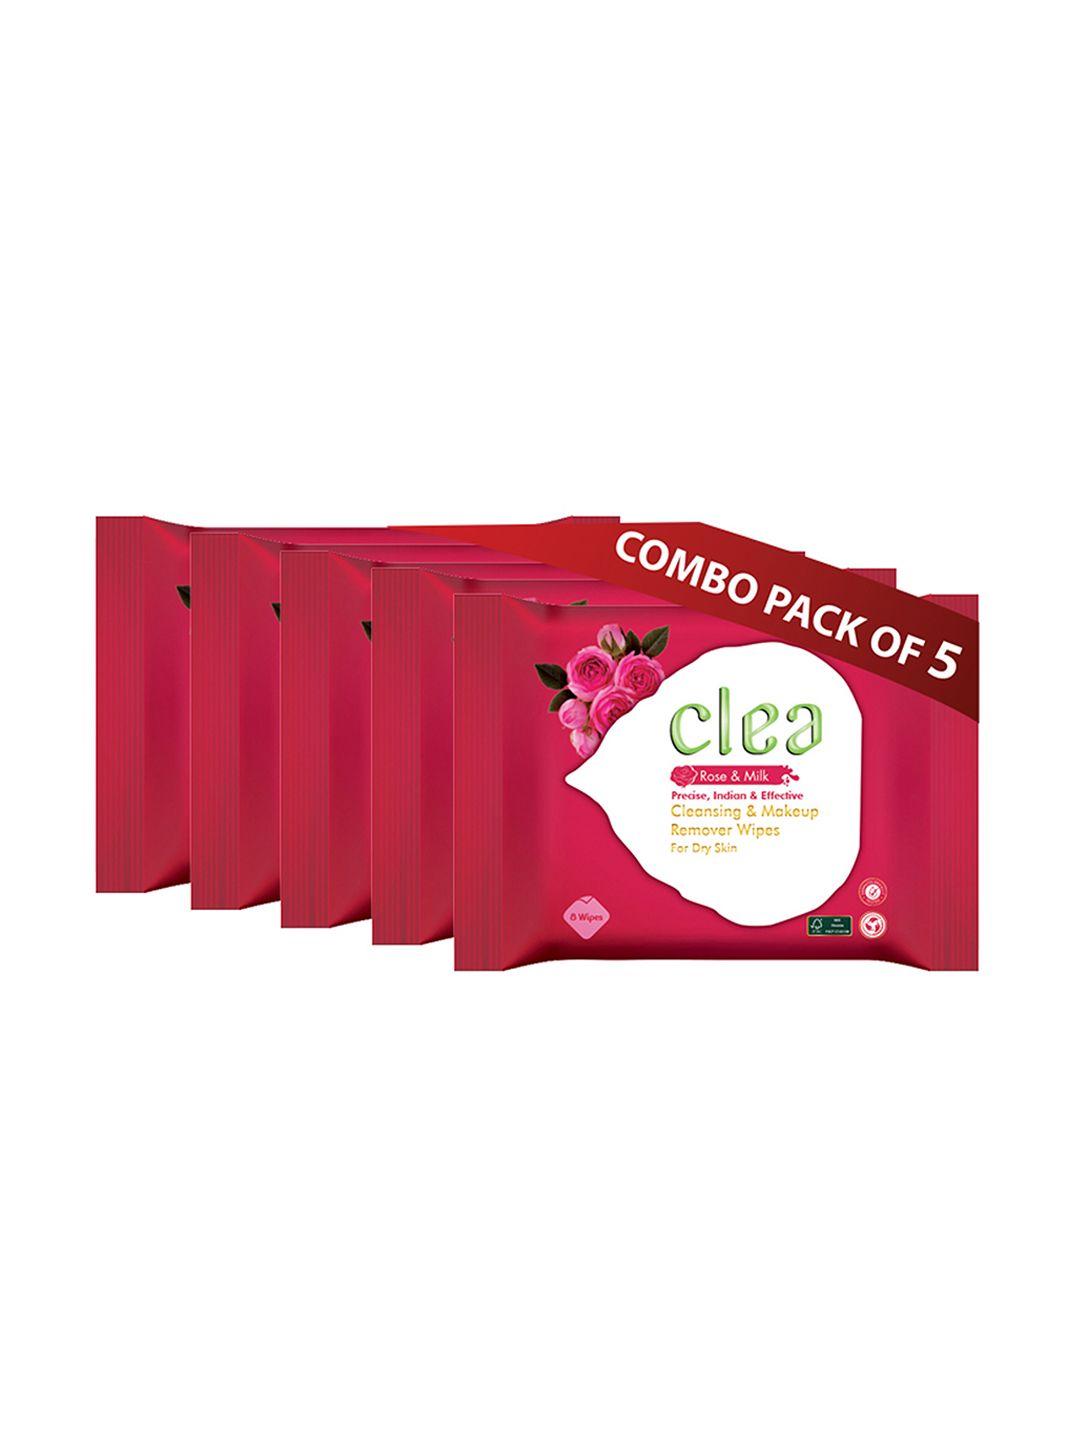 clea set of 5 rose & milk cleansing & makeup remover wet wipes - 8 pulls each